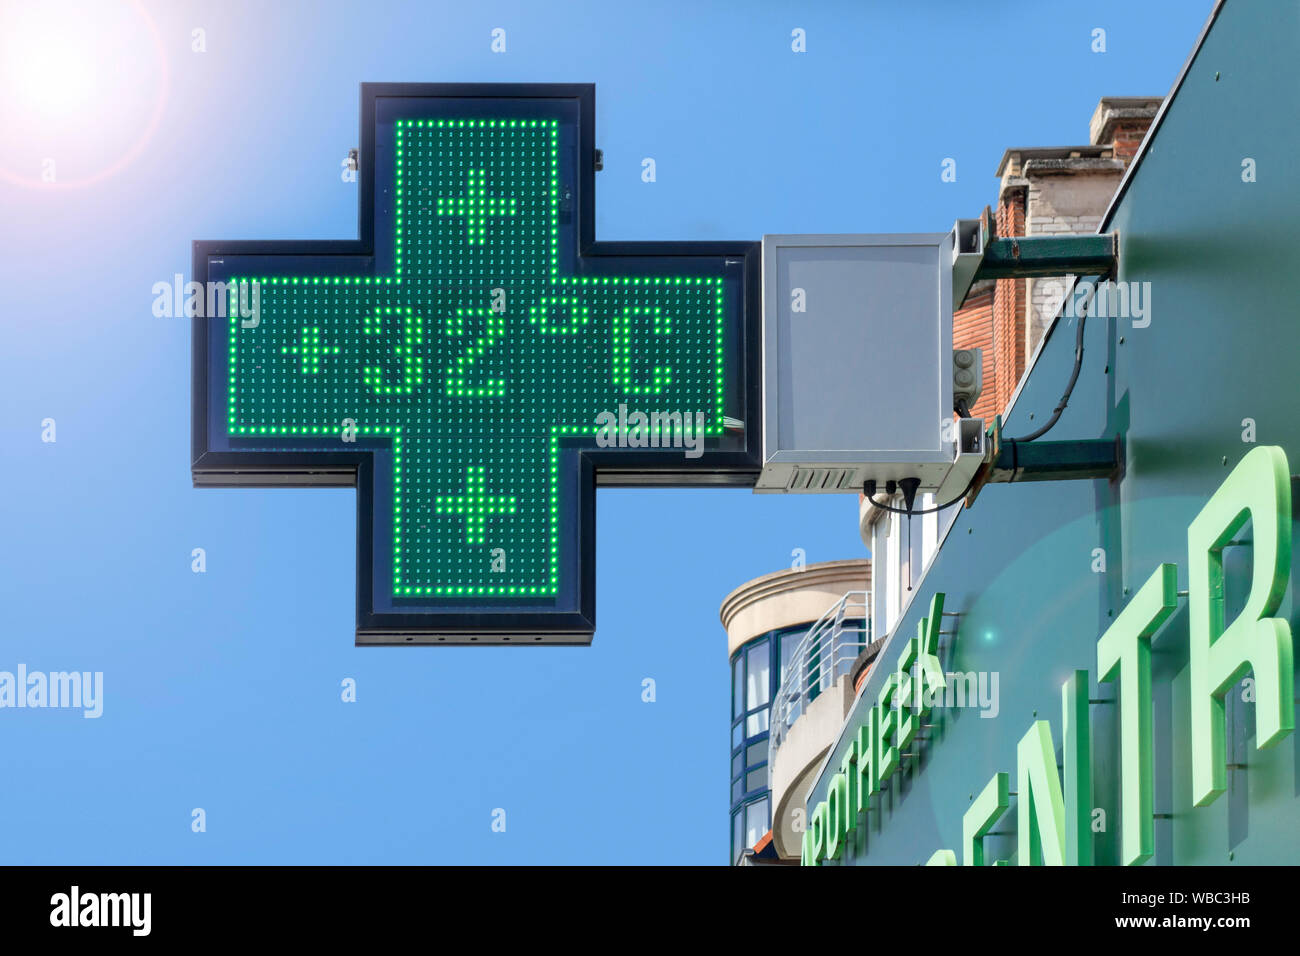 Thermometer in green pharmacy screen sign displays extremely hot temperature of 32 degrees Celsius / 32°C / 32 °C during summer heatwave / heat wave Stock Photo